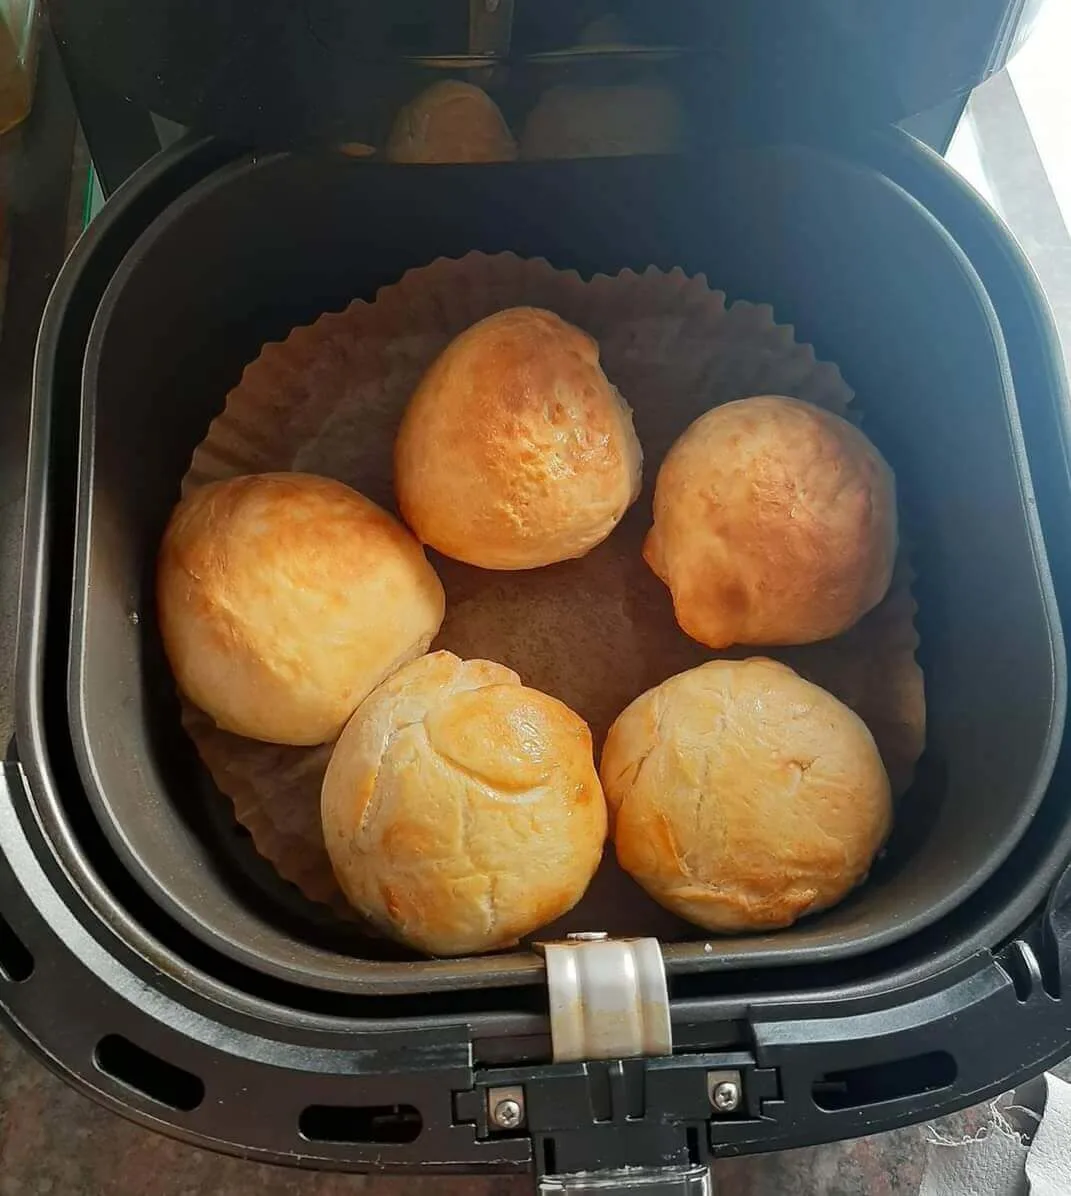 An image of air fried food in an air fryer.